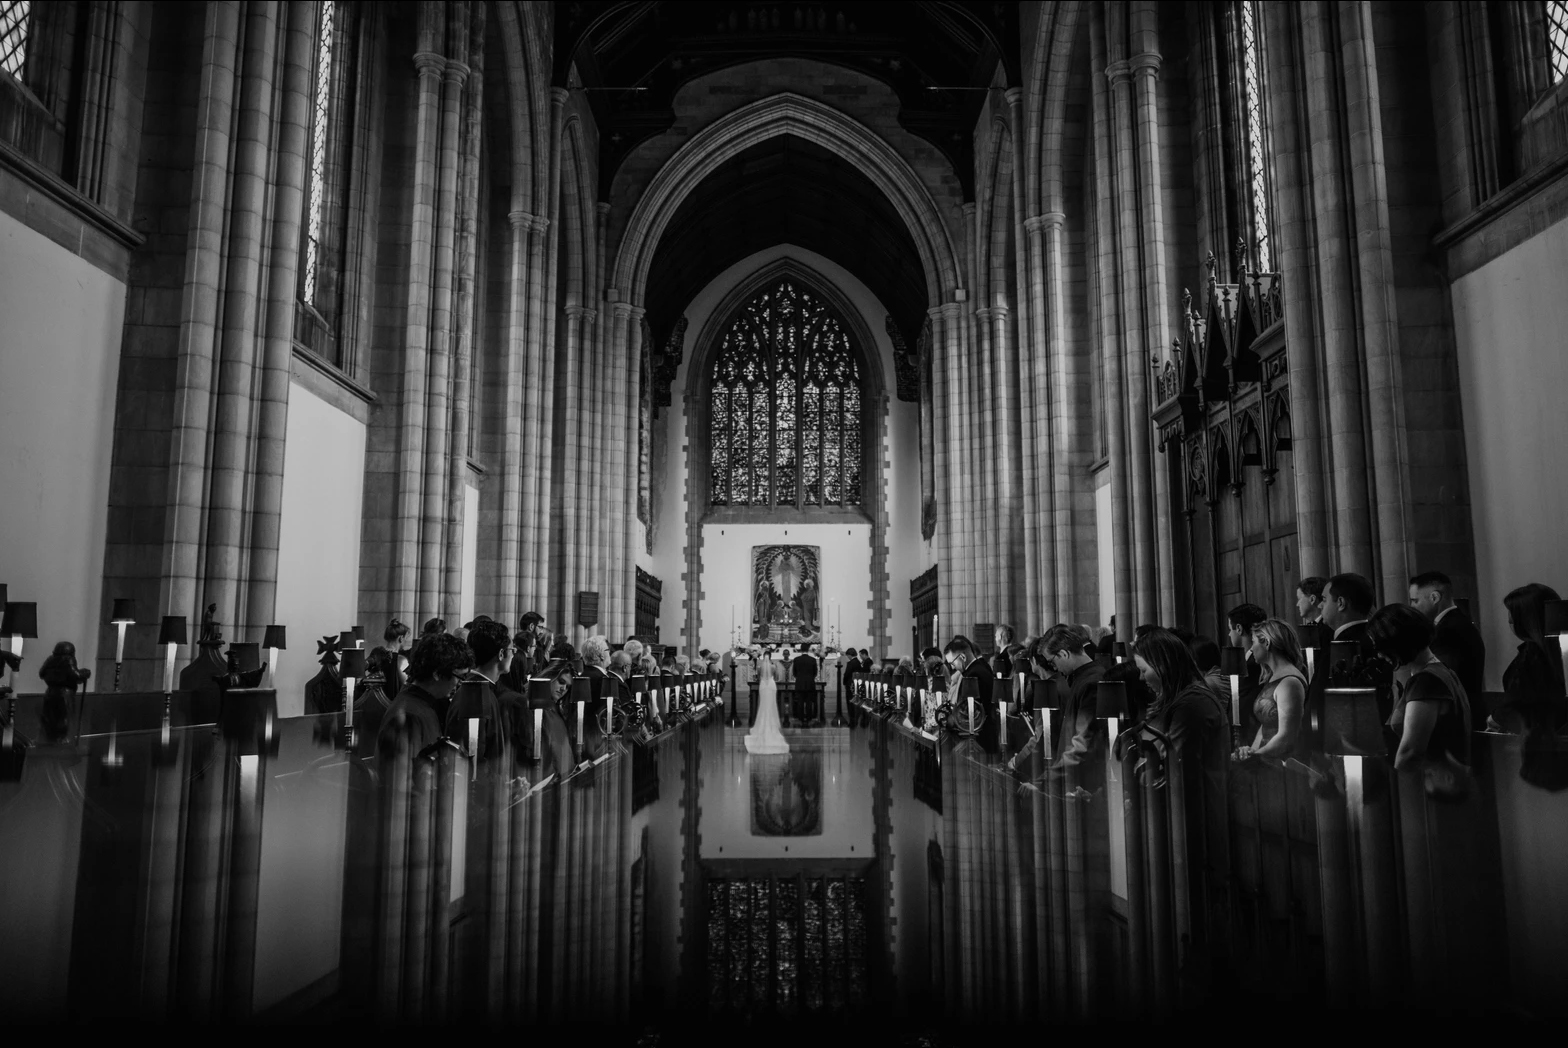 A black and white image of a bride and groom standing at the altar of the wedding ceremony